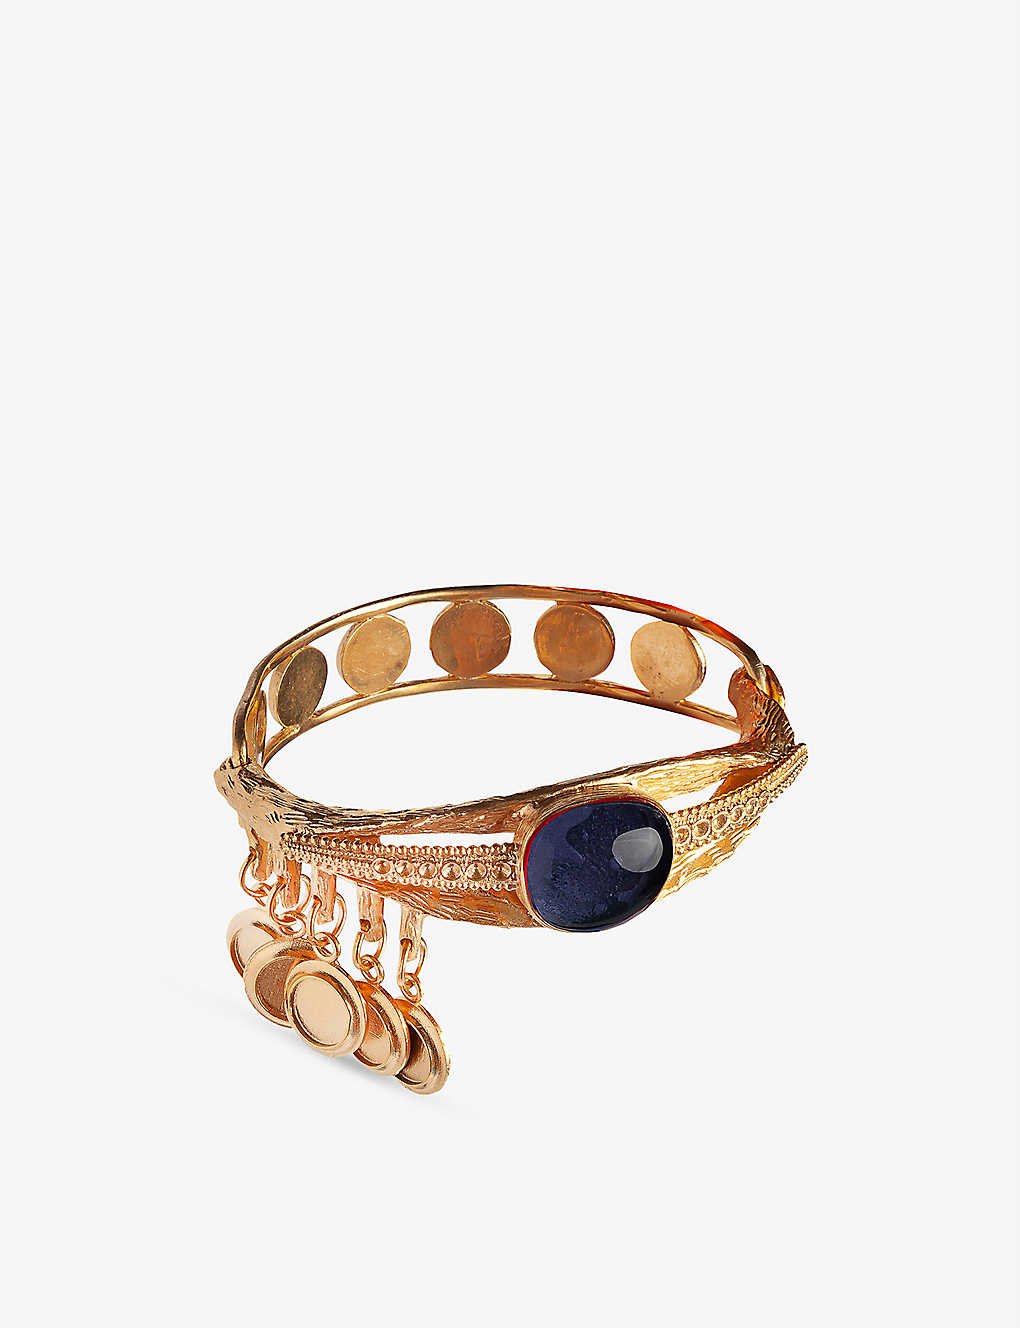 La Maison Couture Sonia Petroff 24ct-gold Plated Brass And Onyx Bracelet